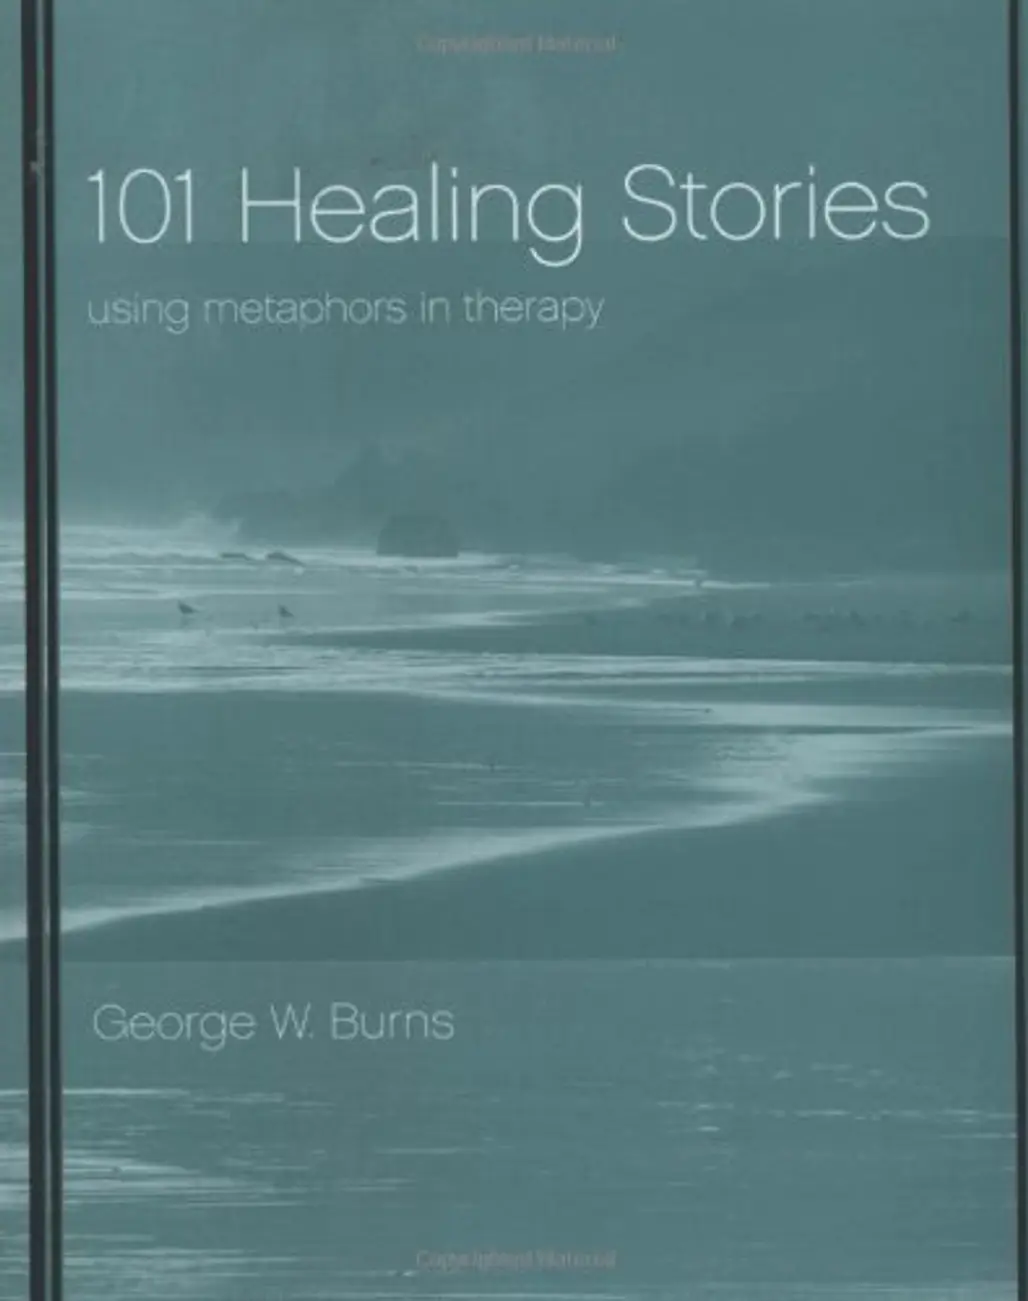 George W. Burns – 101 Healing Stories: Using Metaphors in Therapy